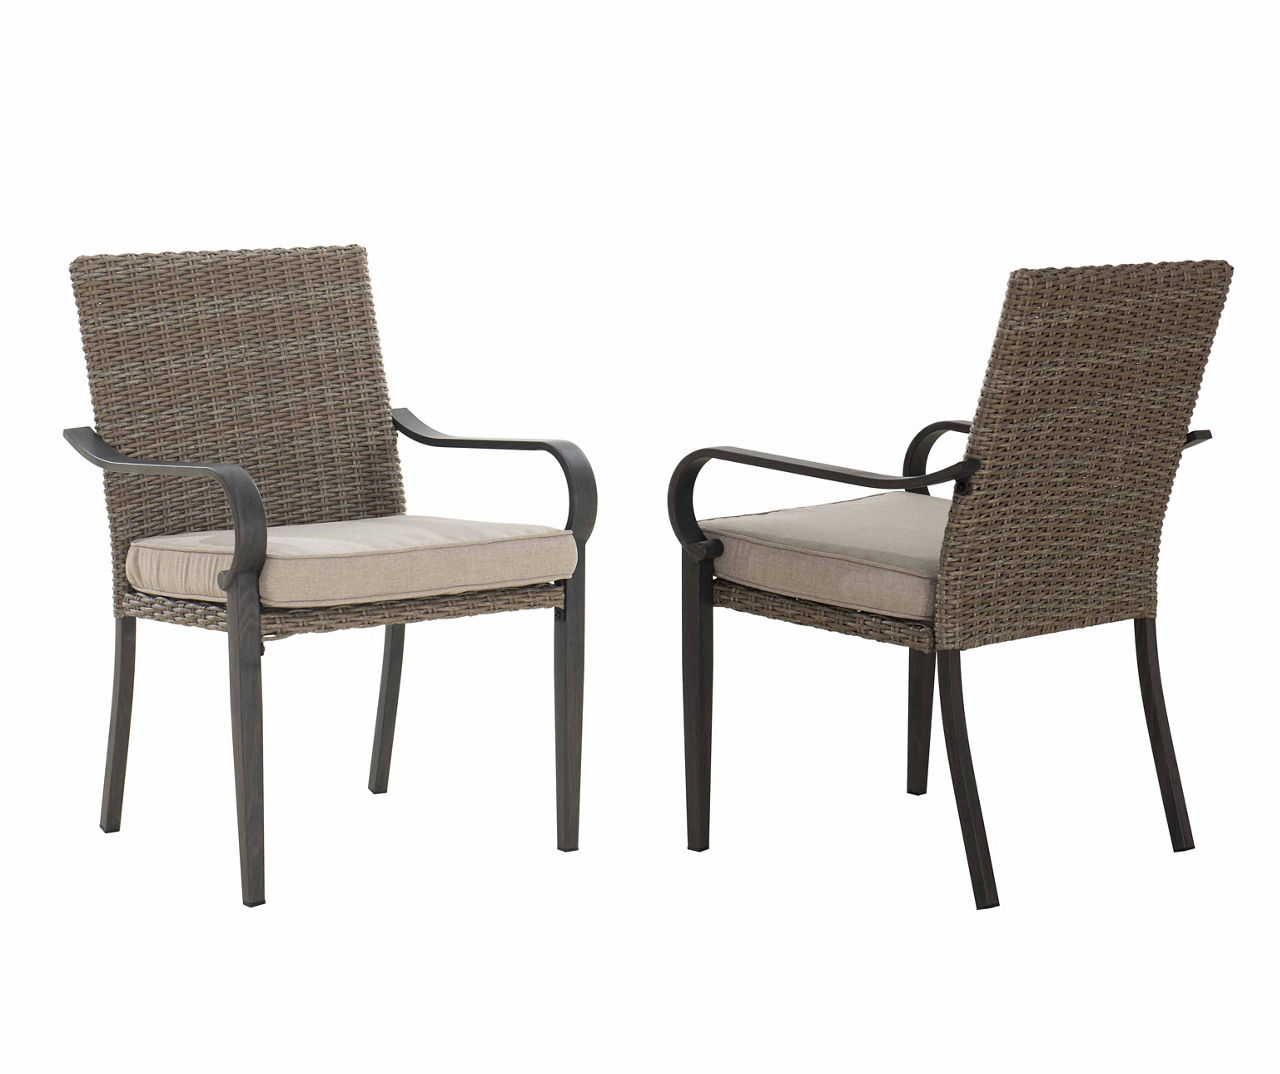 Yorktown Brown Wicker Cushioned Patio Dining Chairs, 2-Pack